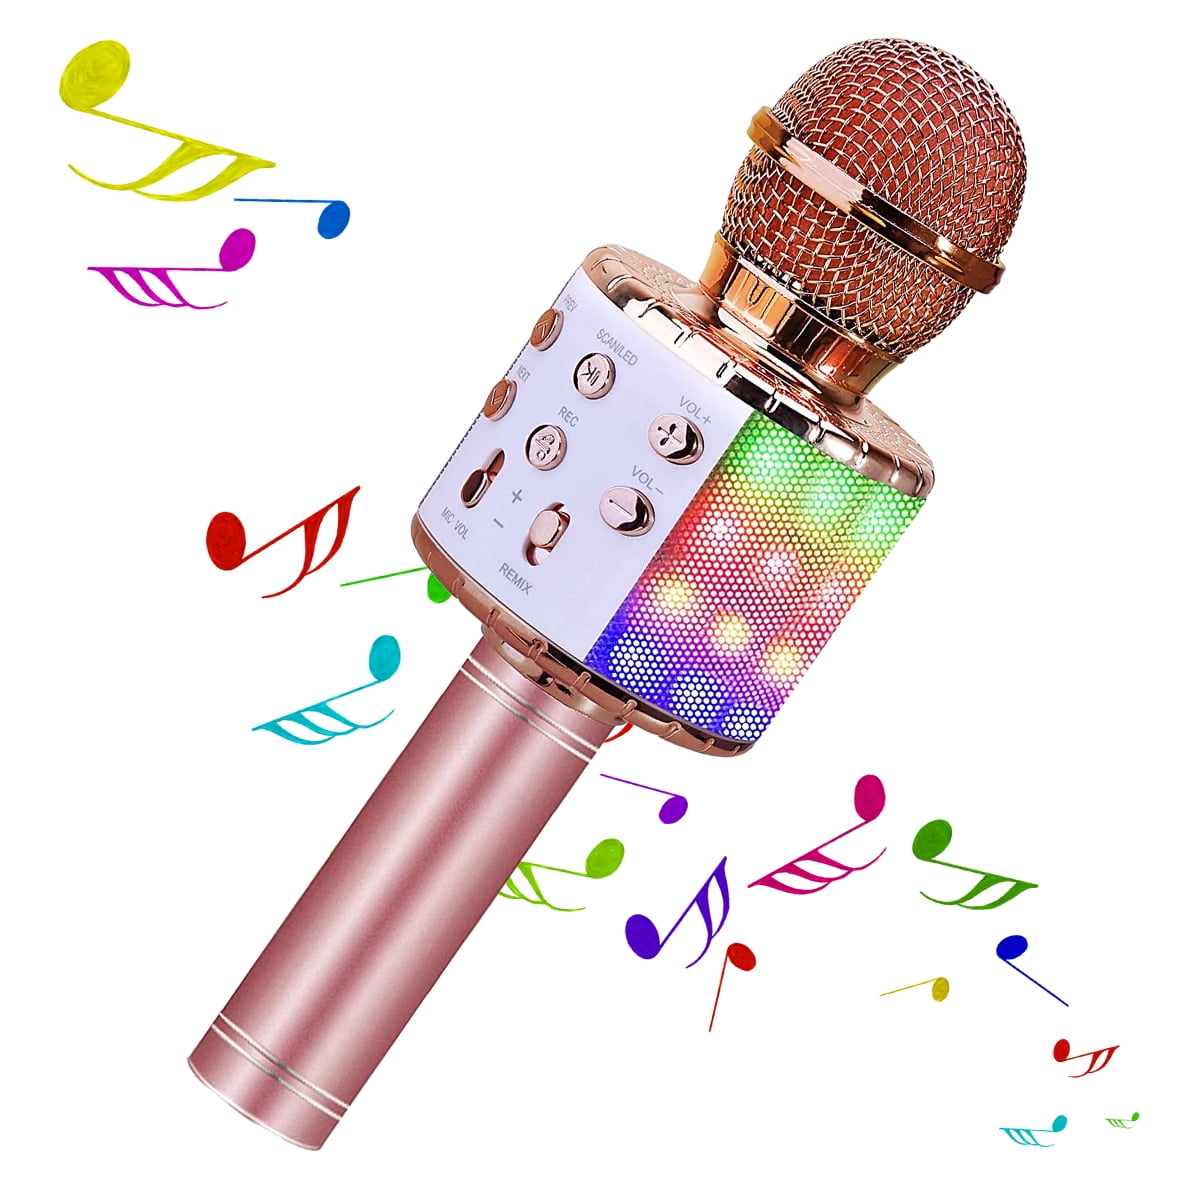 Gifts For 6 Year Old Girl,toys For 4 Year Old Girls,kids Toys Microphone  For Girls,12 Year Old Girl Gifts,toys For Girls 10-12 Years Old - Snngv